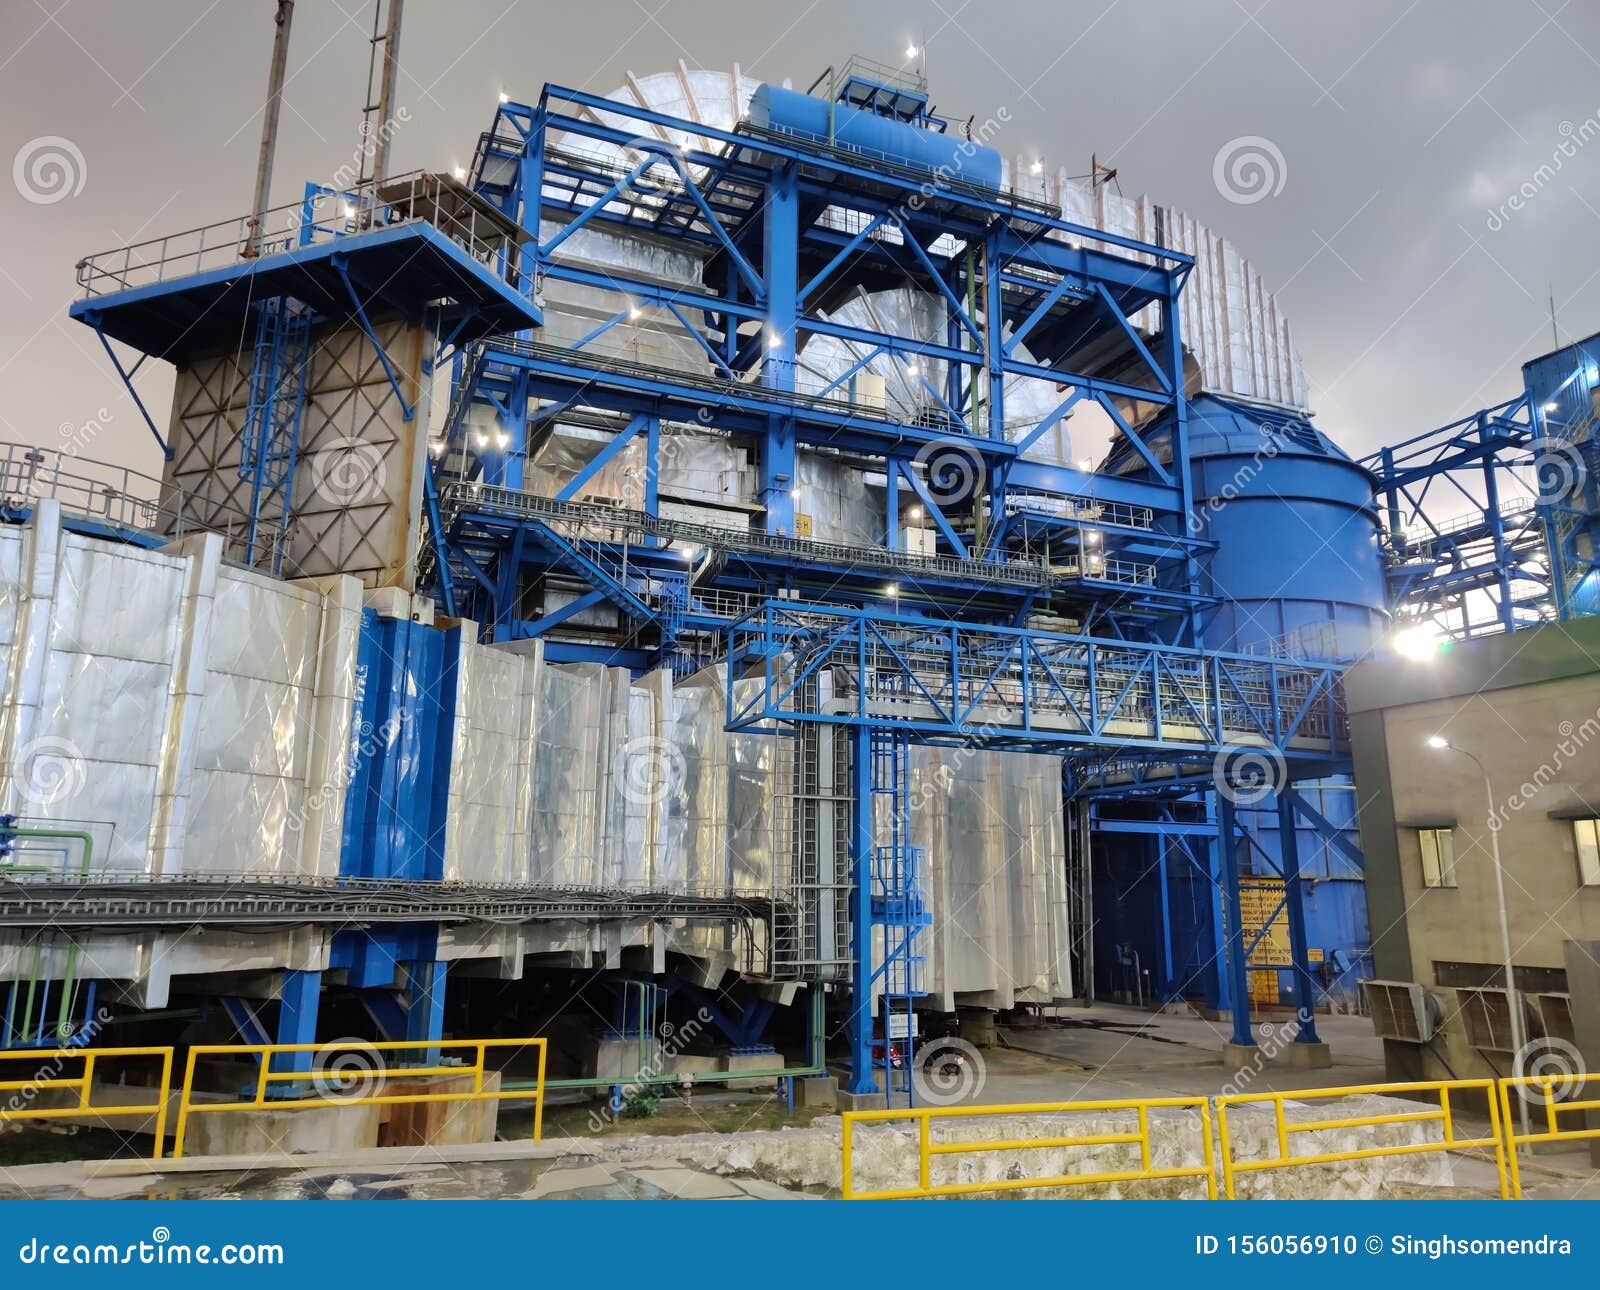 components of power plant: fgd flue gas desulfurization plant